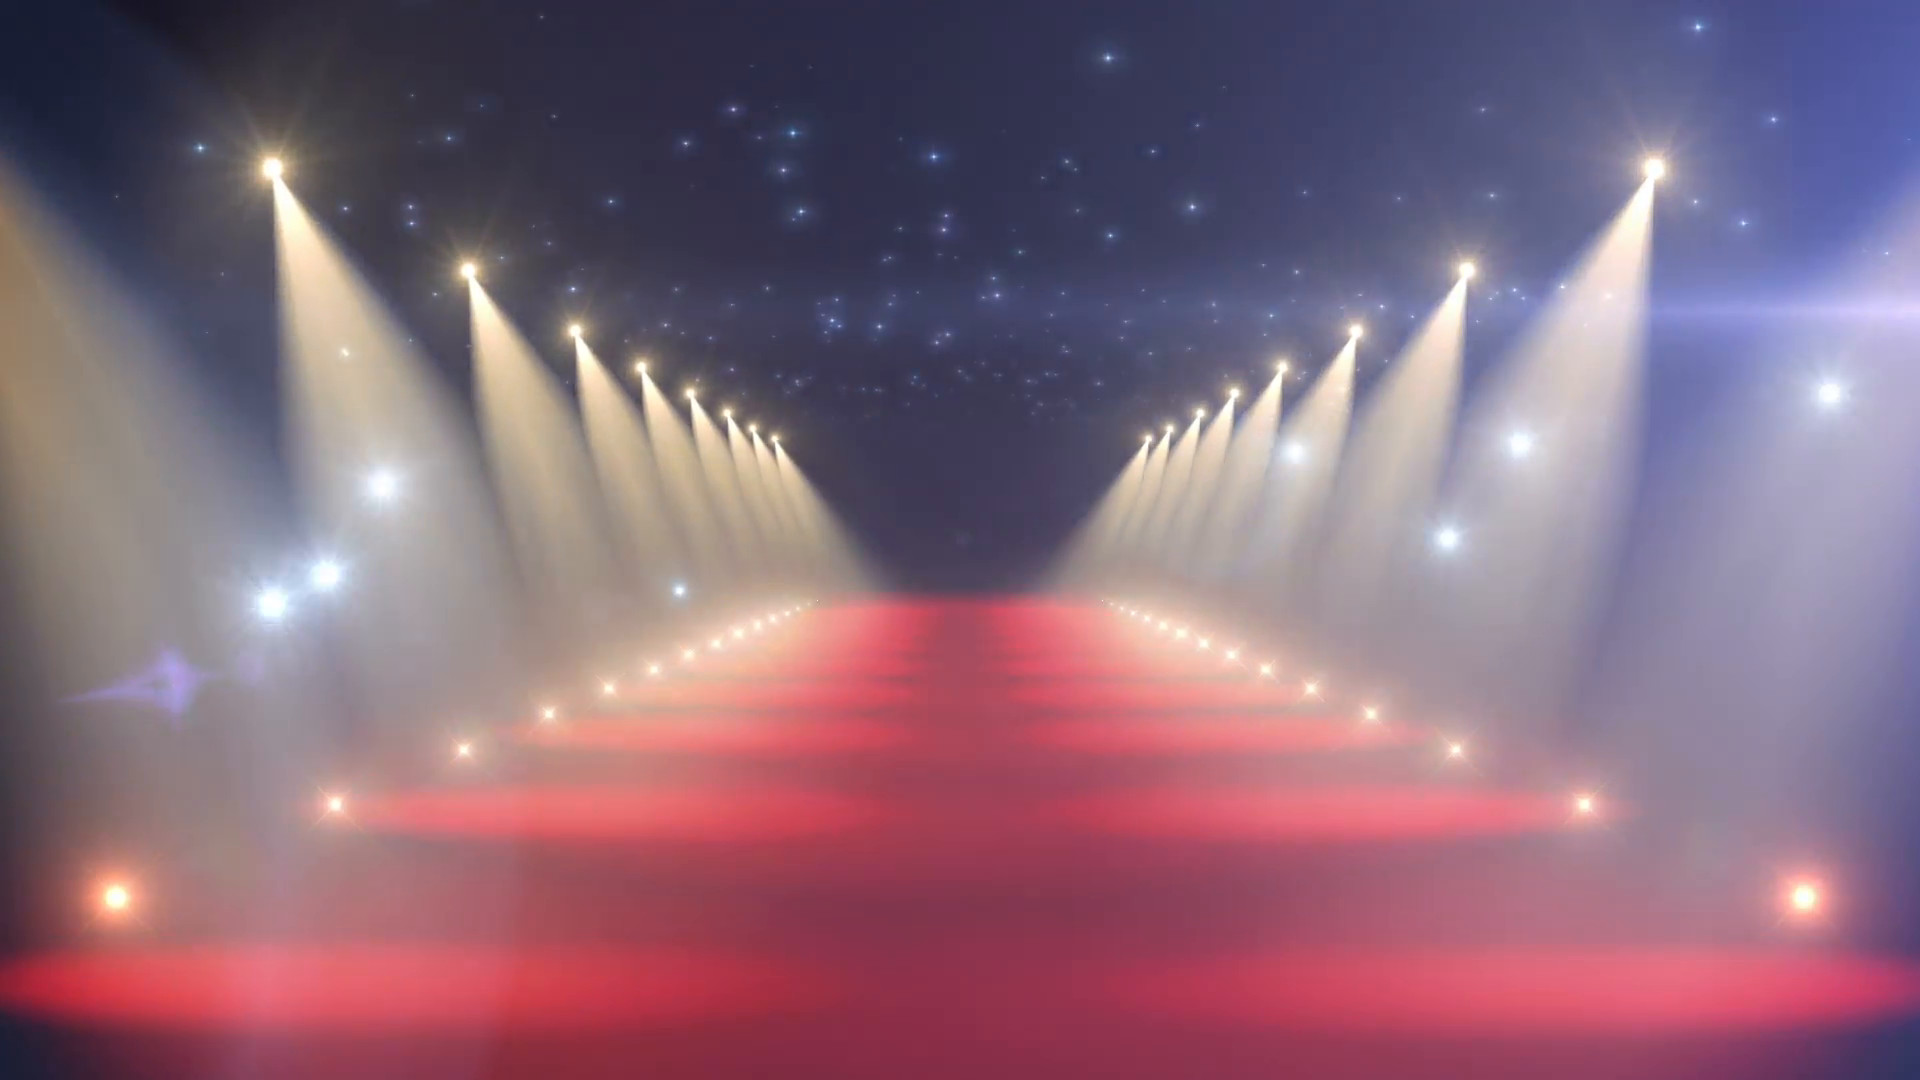 1920x1080 Moving On Red Carpet With Lights And Flush Bulb Loop Motion Background -  VideoBlocks